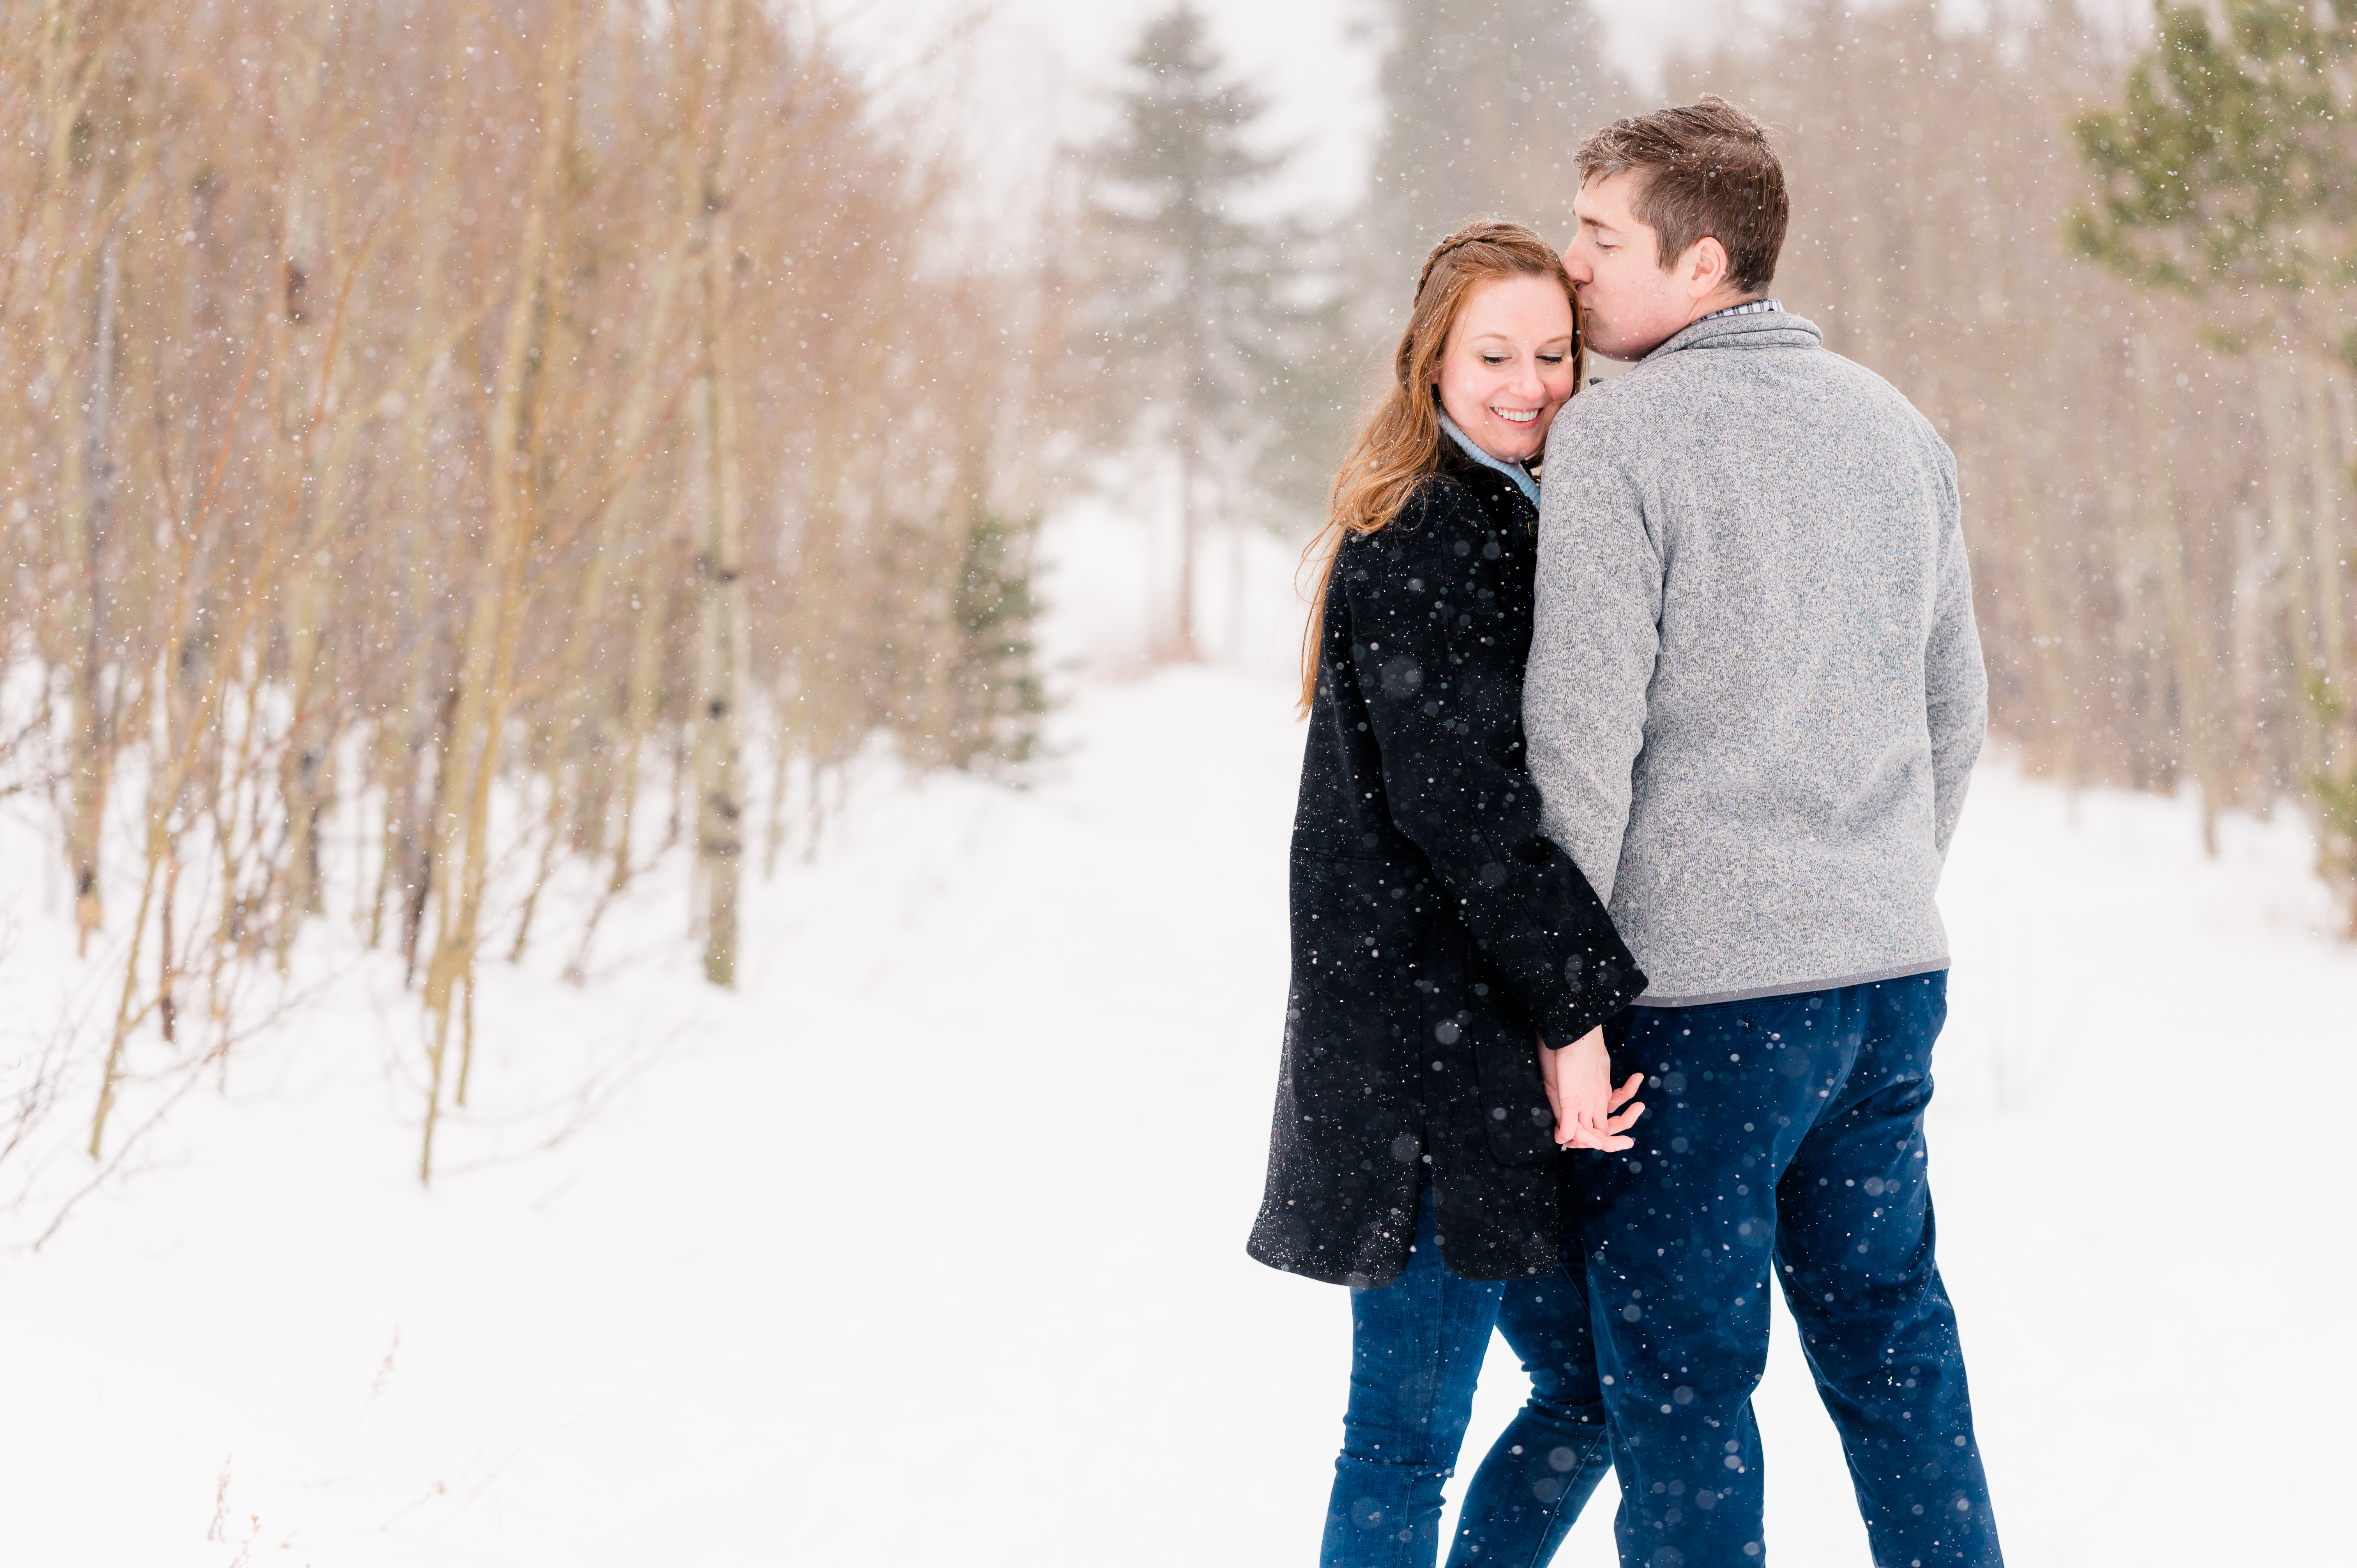 Snowy Lily Lake Engagement | Estes Park Colorado | Britni Girard Photography and Film | Winter Engagement in Rocky Mountain National Park | Walking in Aspen trees